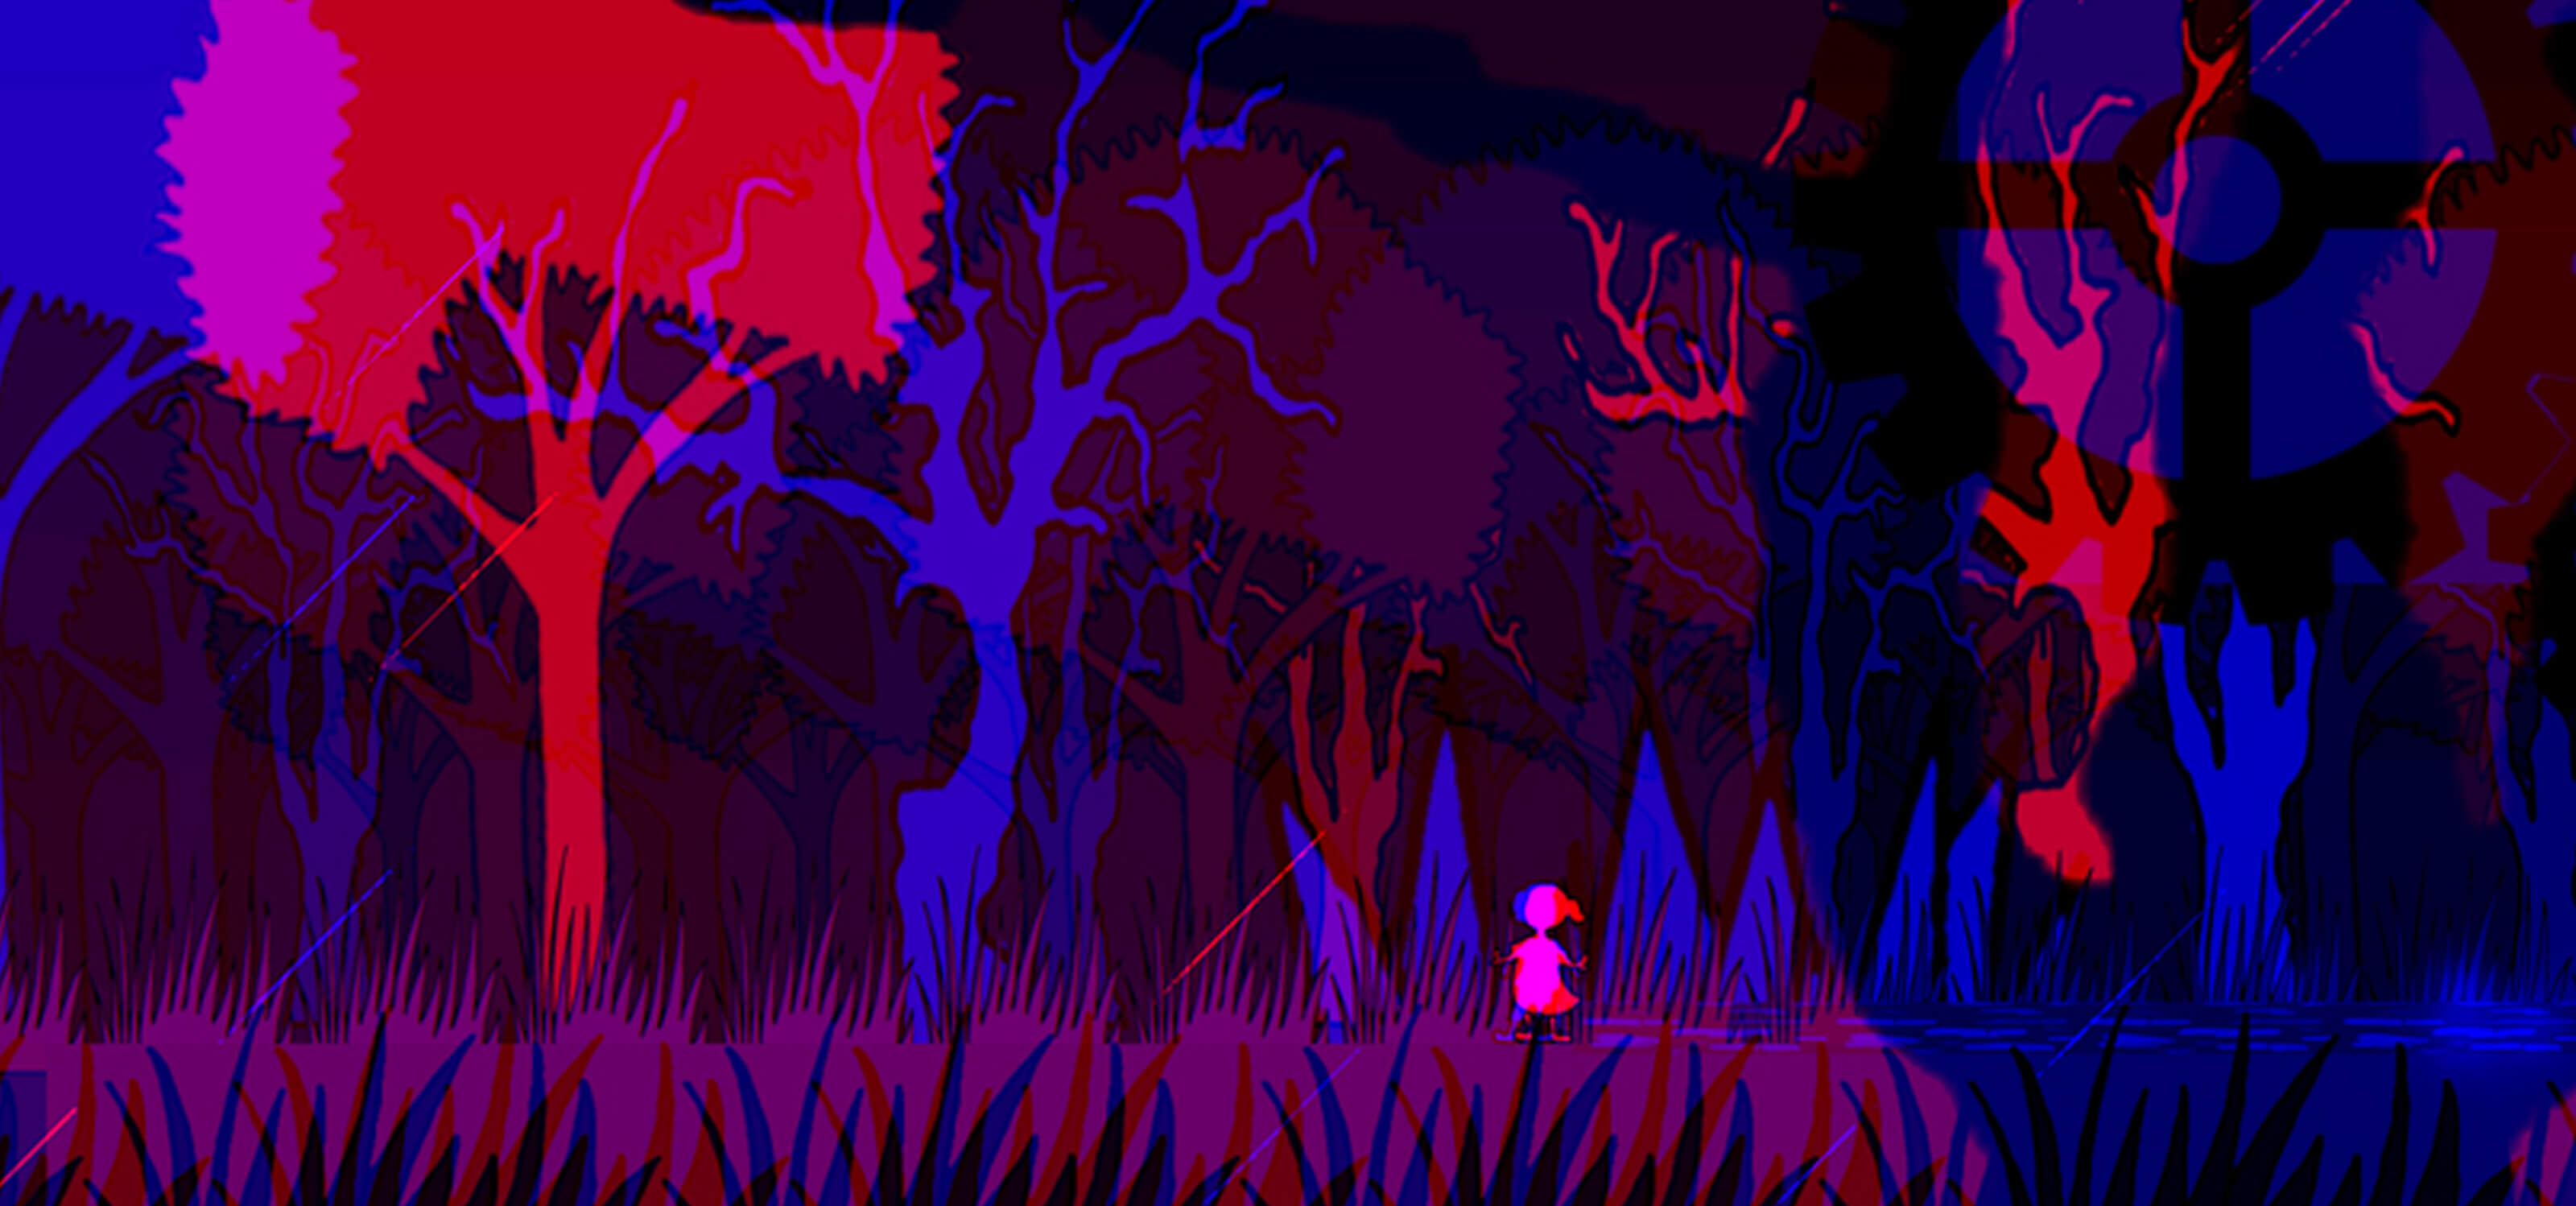 Screenshot from DigiPen student game Sunder of a small girl in a forest of blue, red and purple trees